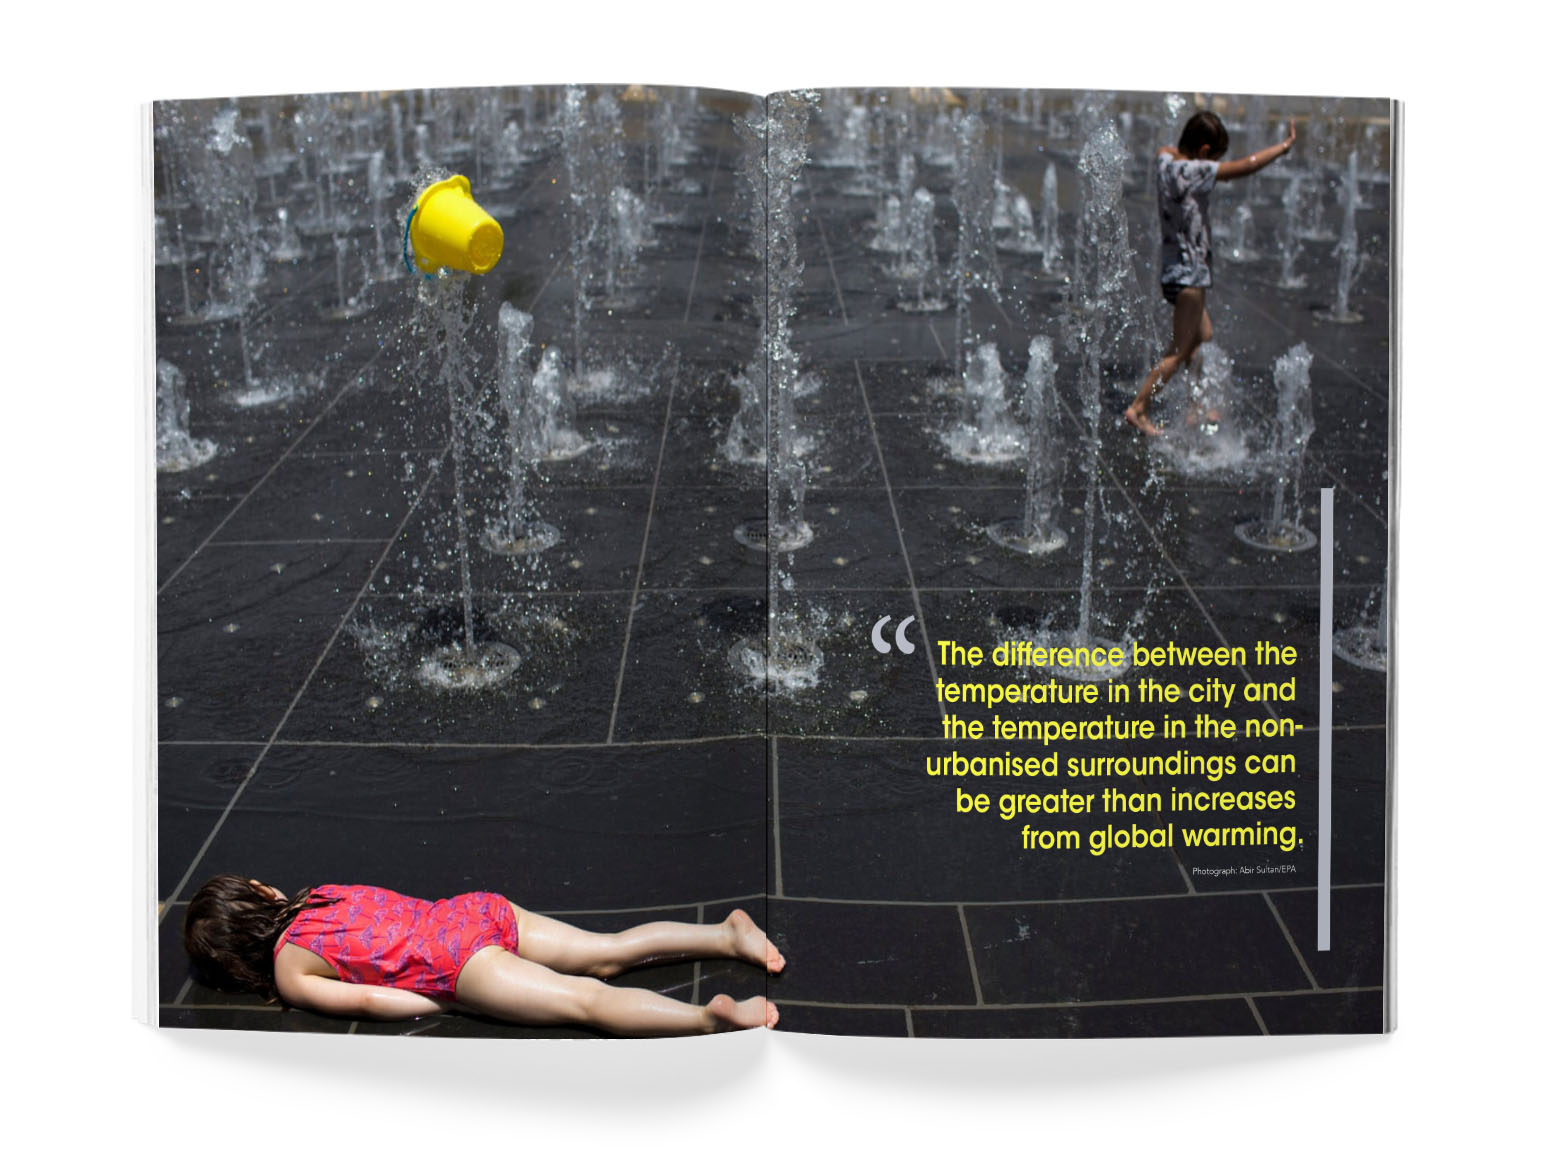 Full page photo spread of young girl facedown in a splash park.